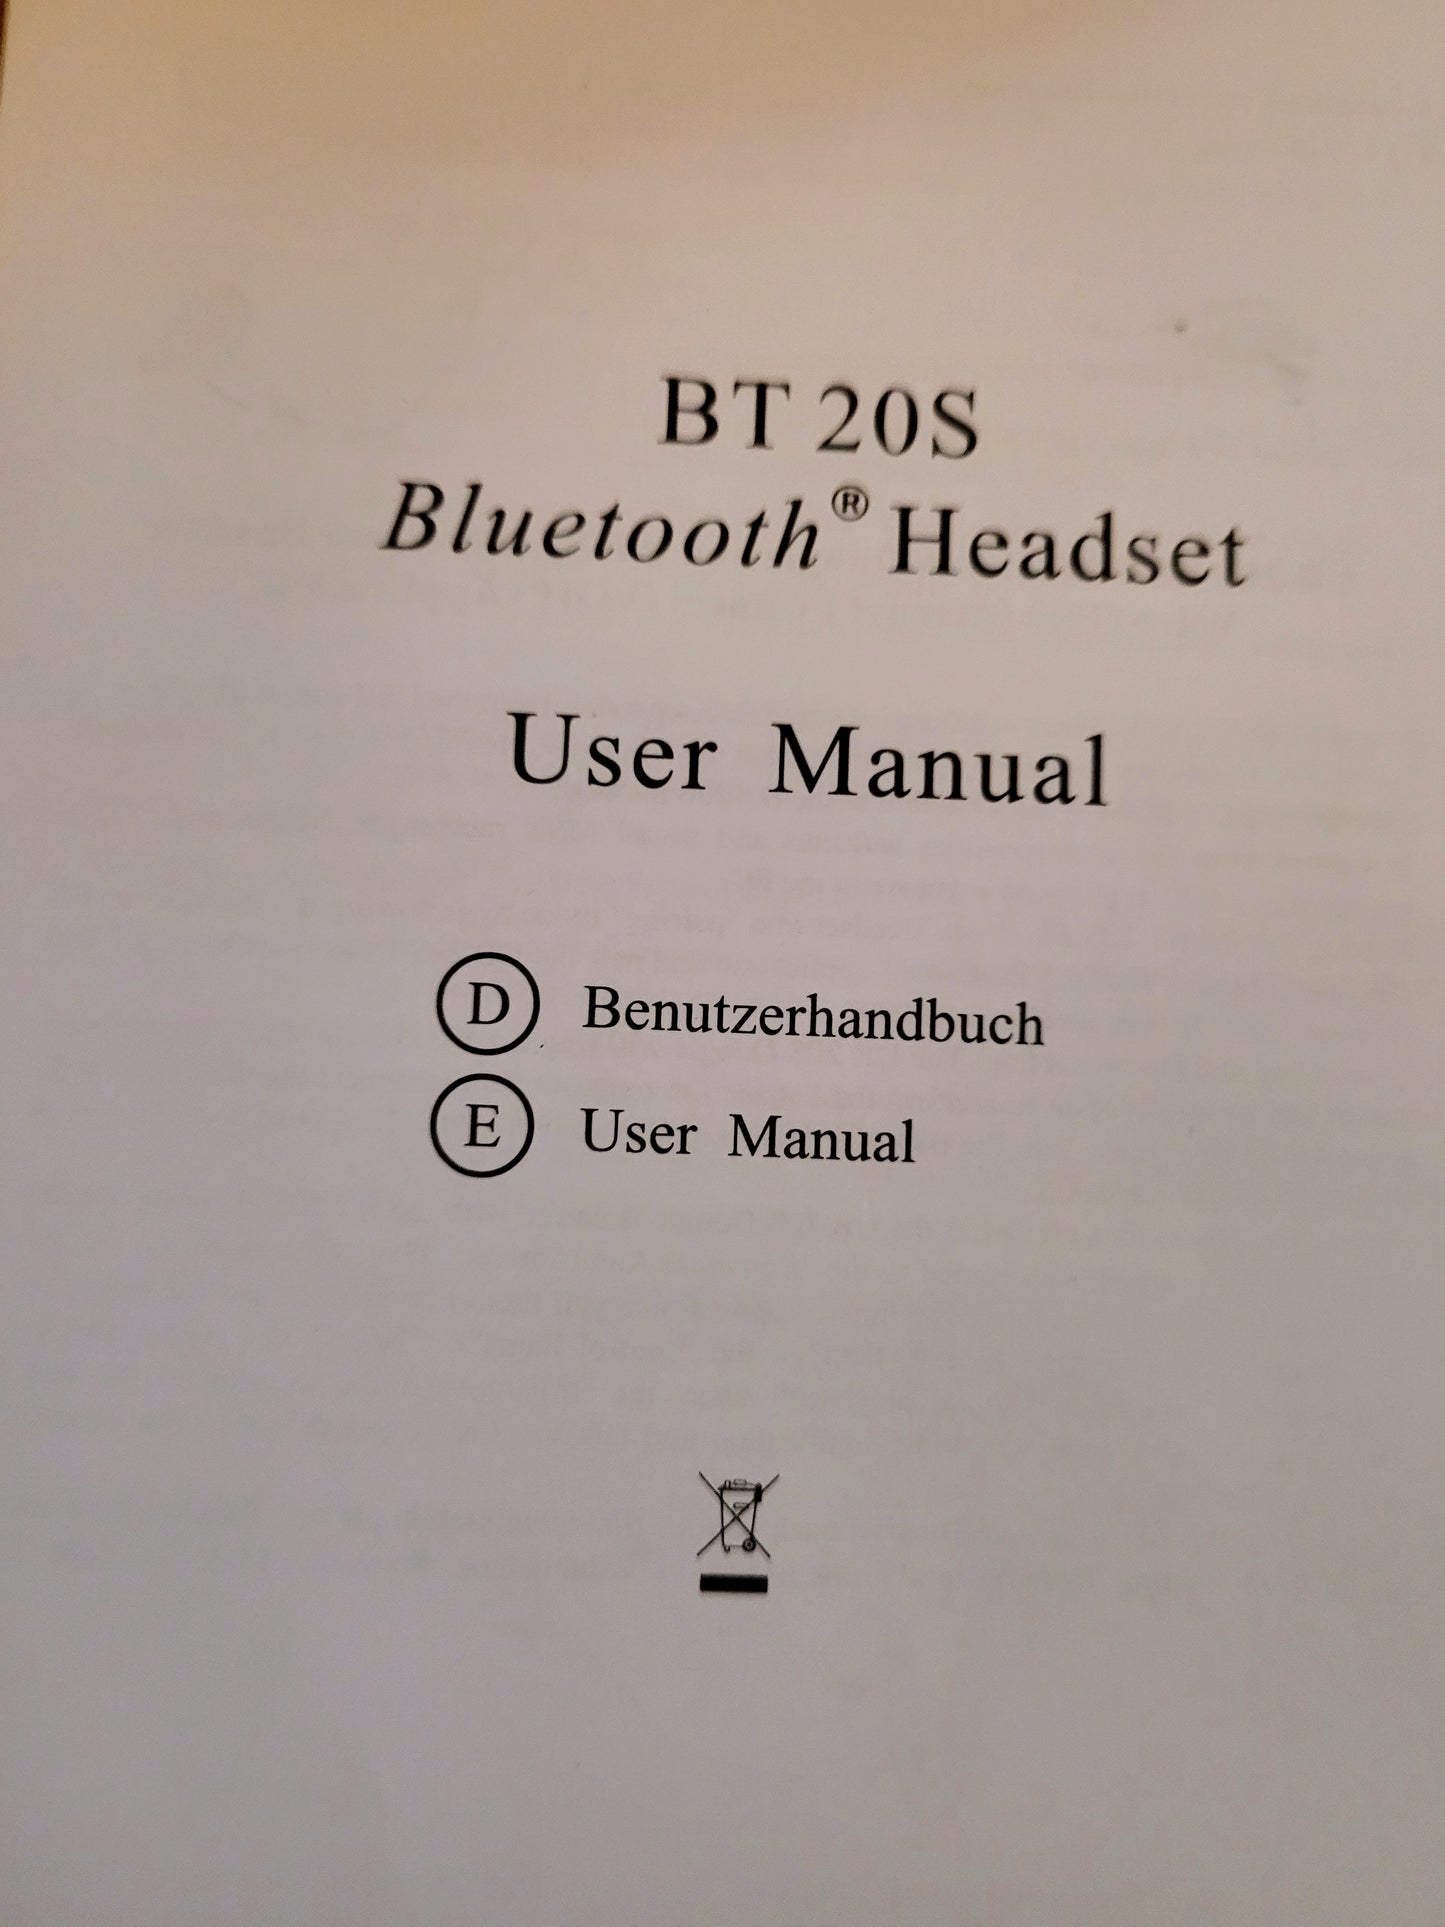 New *Bluetooth Headset #BT 20S w/ 2 Chargers